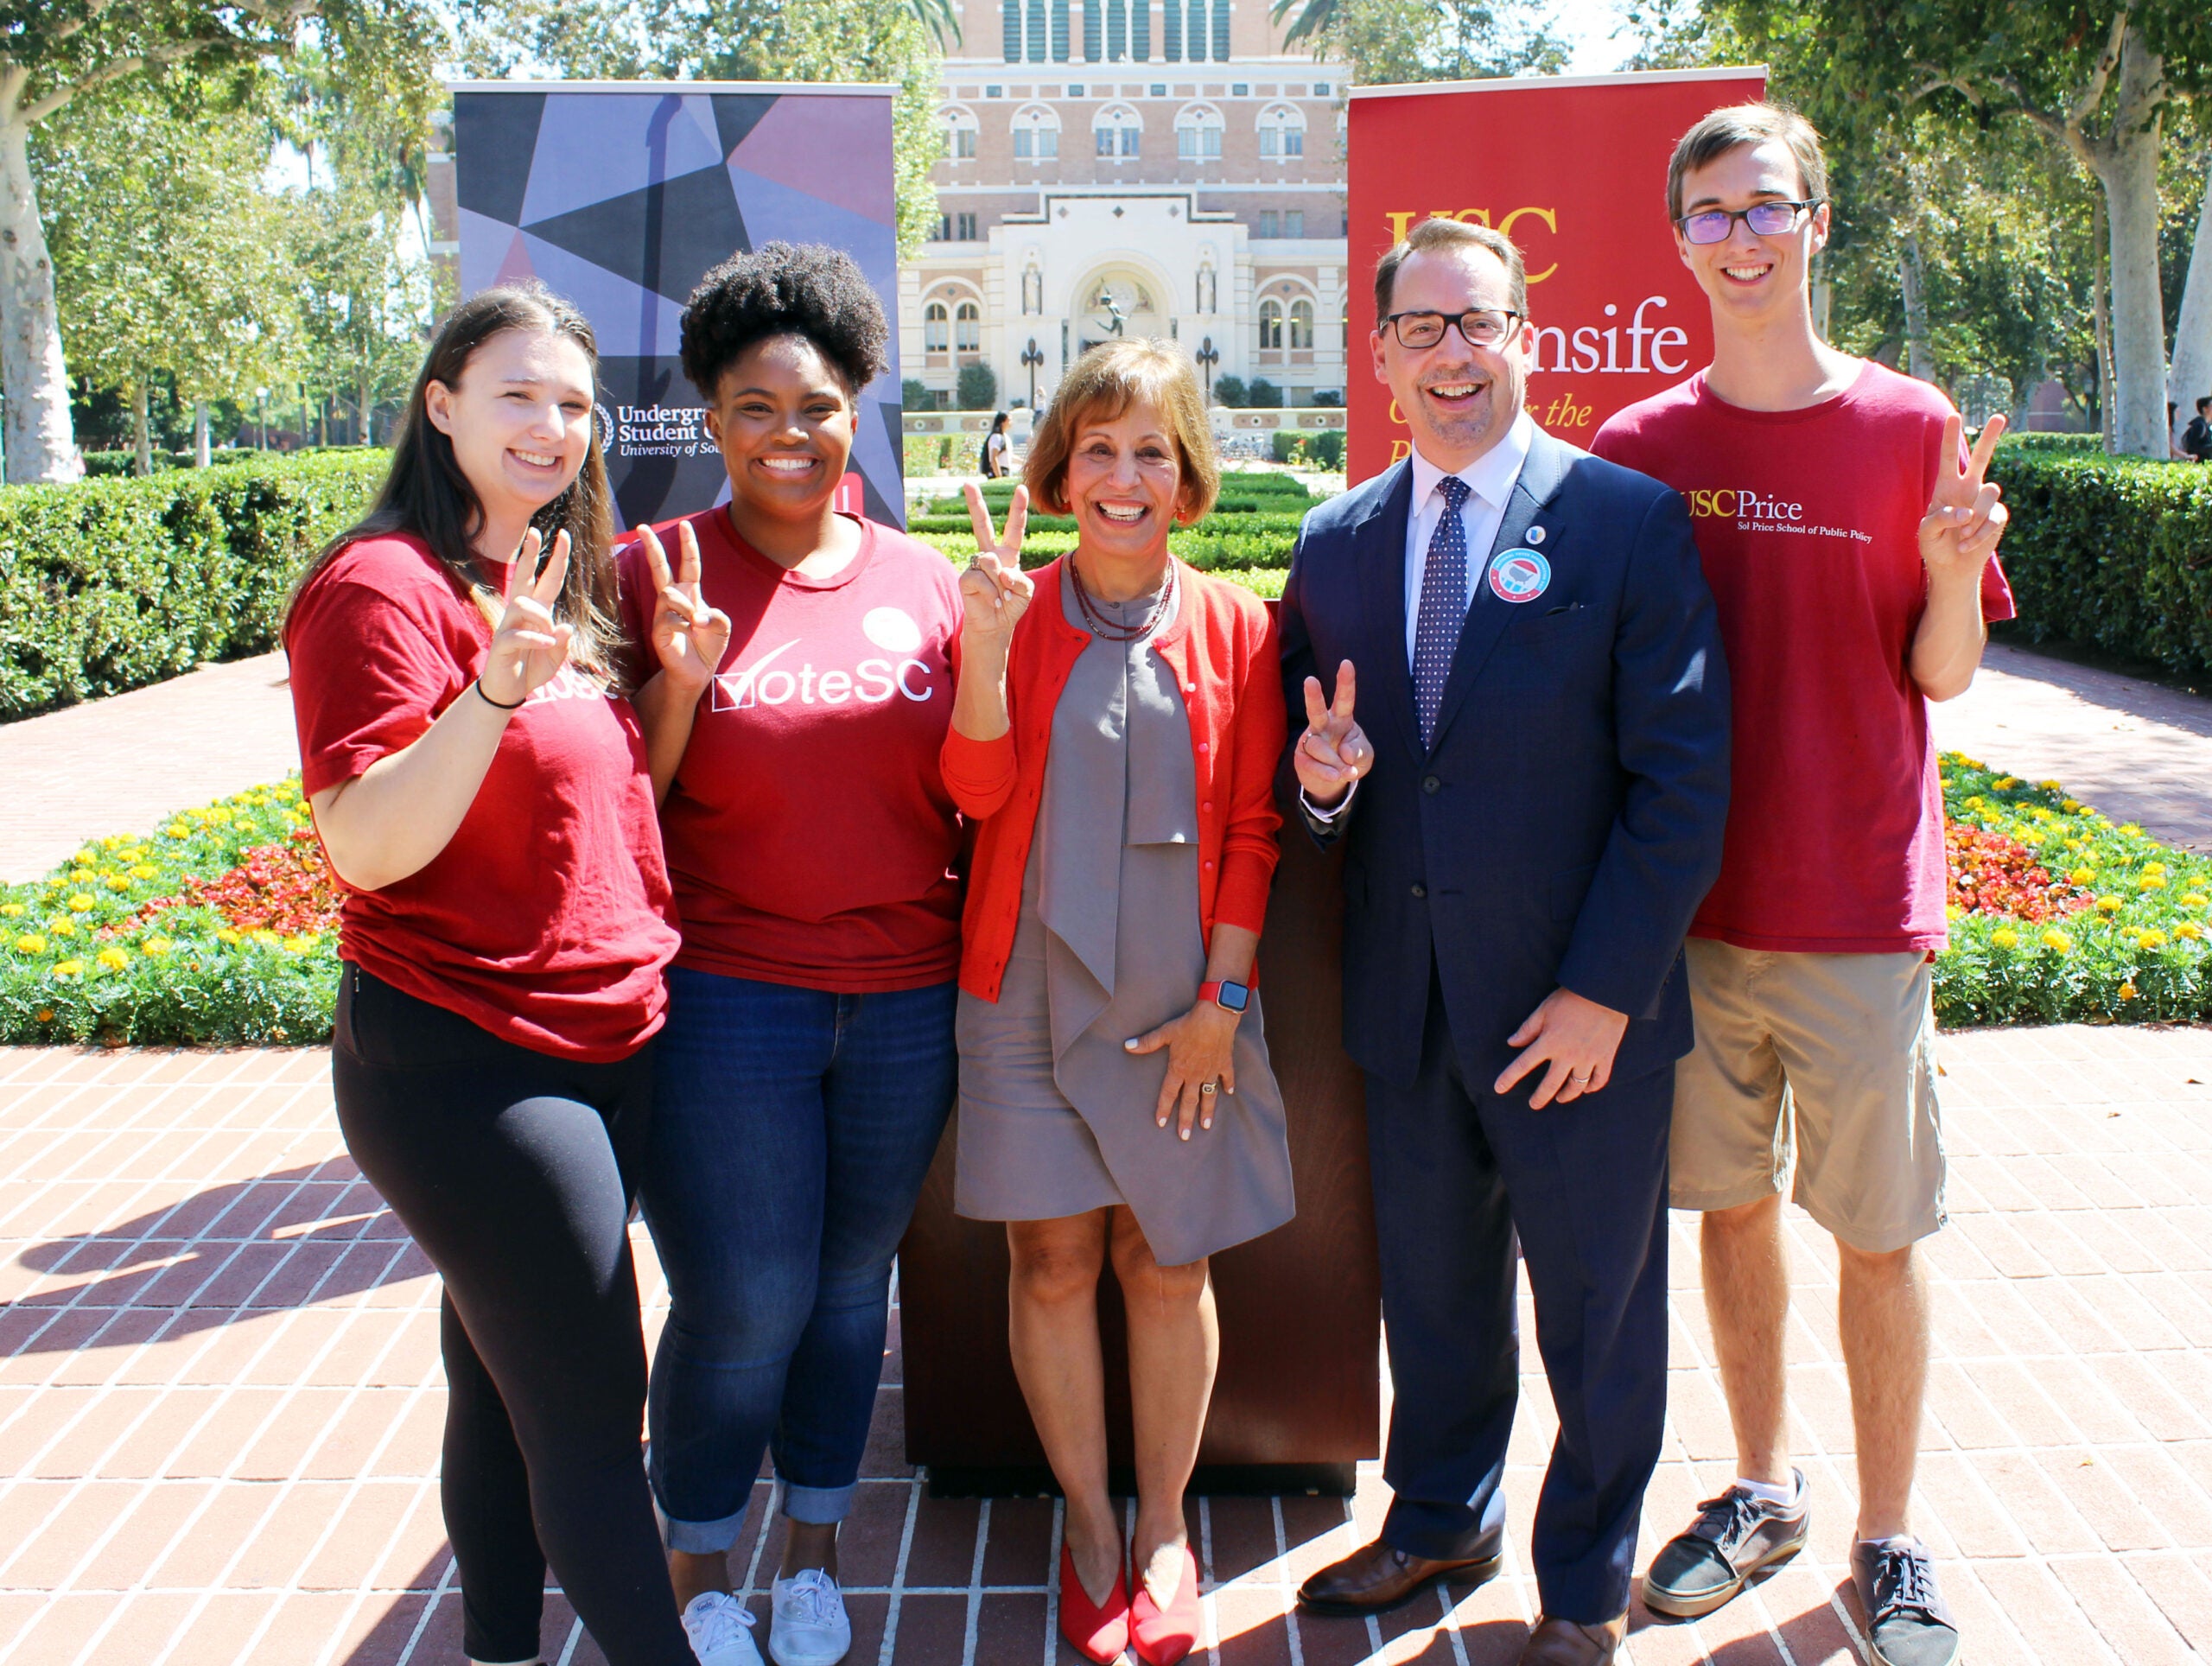 VoteSC student members with USC President Carol Folt and Los Angeles County Registrar-Recorder/County Clerk Dean C. Logan